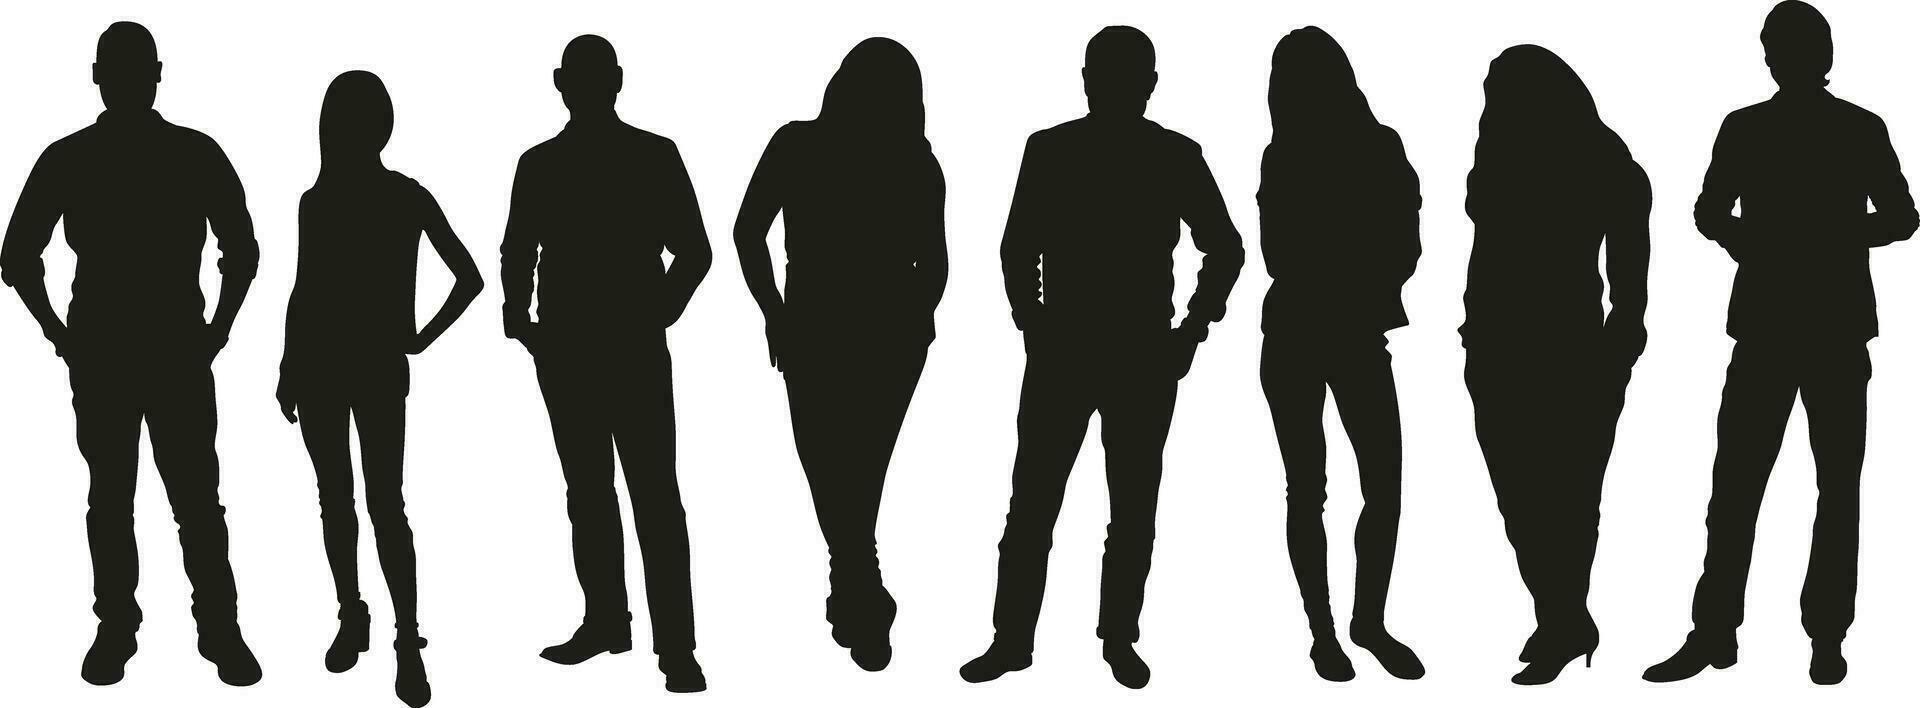 People Silhouettes vector set 1